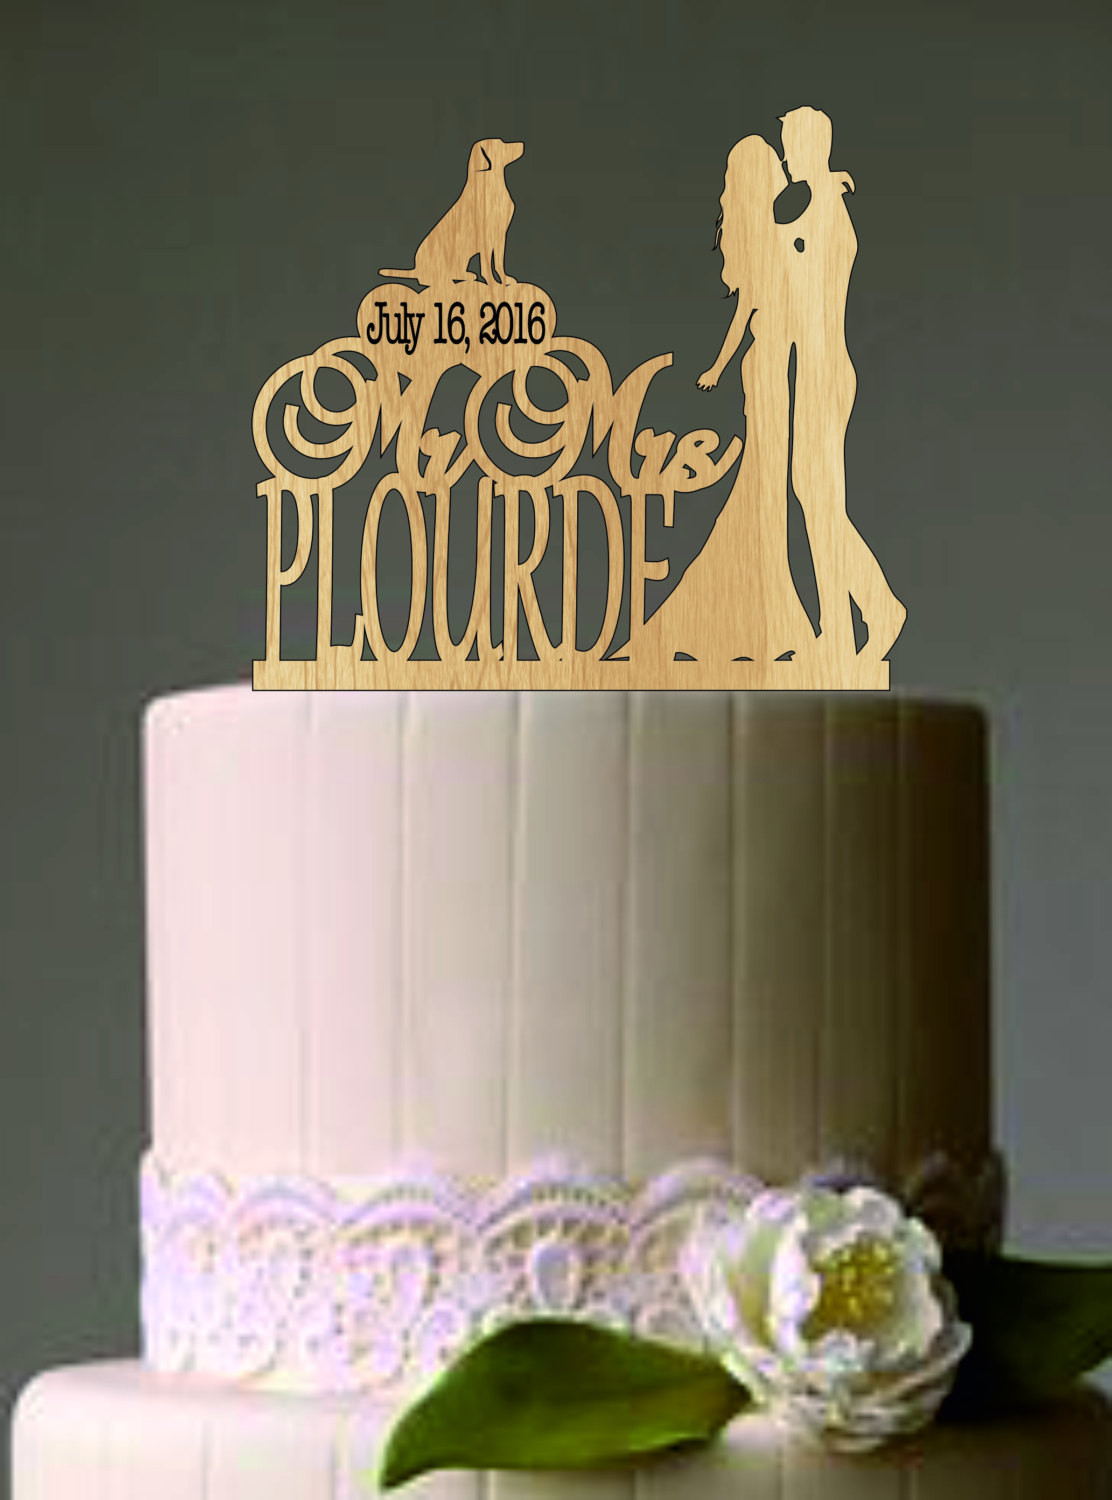 Personalized Cake Toppers For Wedding Cakes
 Rustic Wedding Cake Topper Personalized Cake Topper Funny